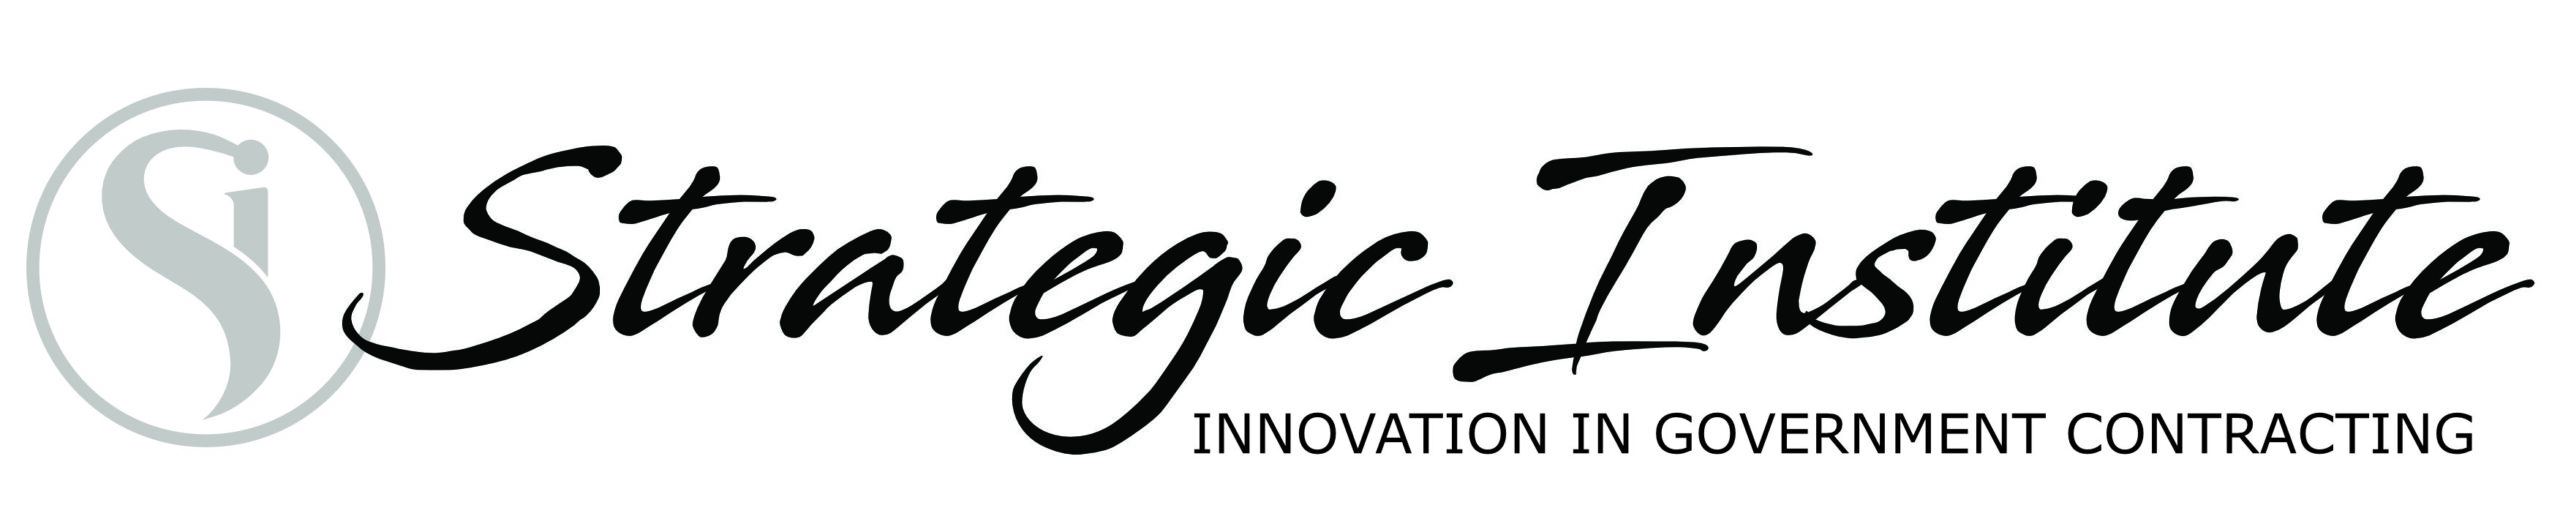 Strategic Institute for Innovation in Government Contracting